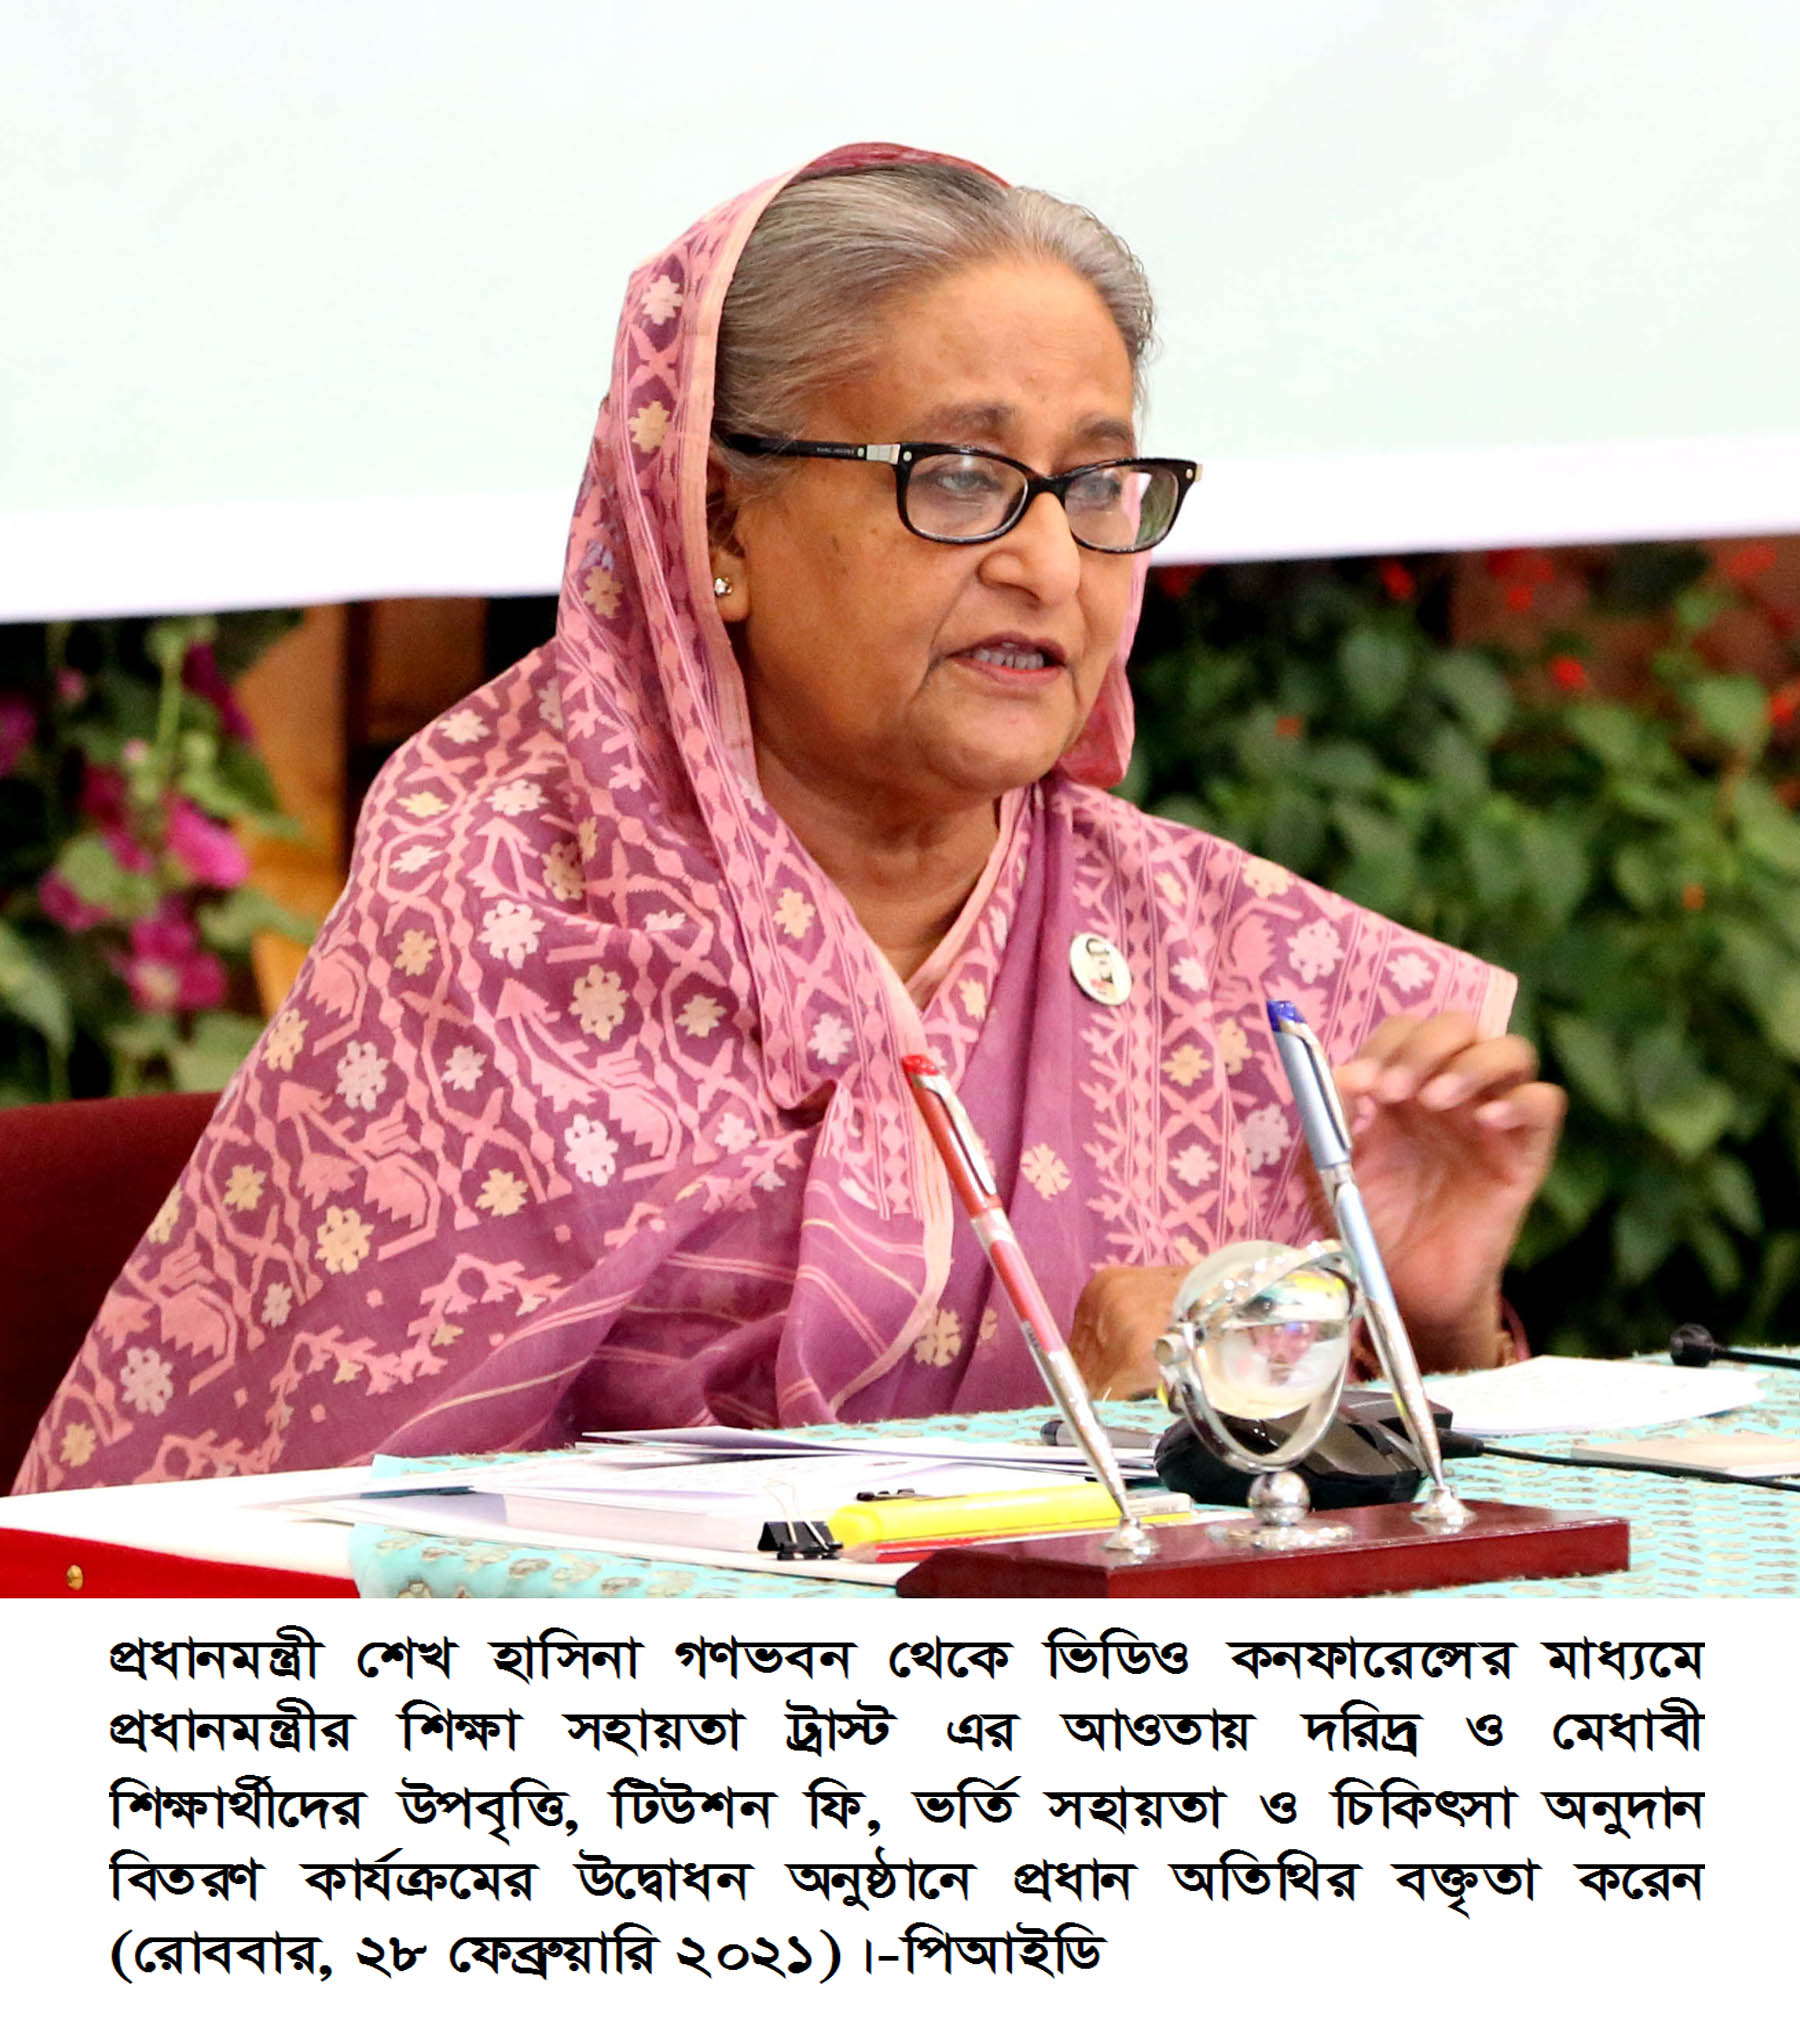 Sheikh Hasina attends special event on education